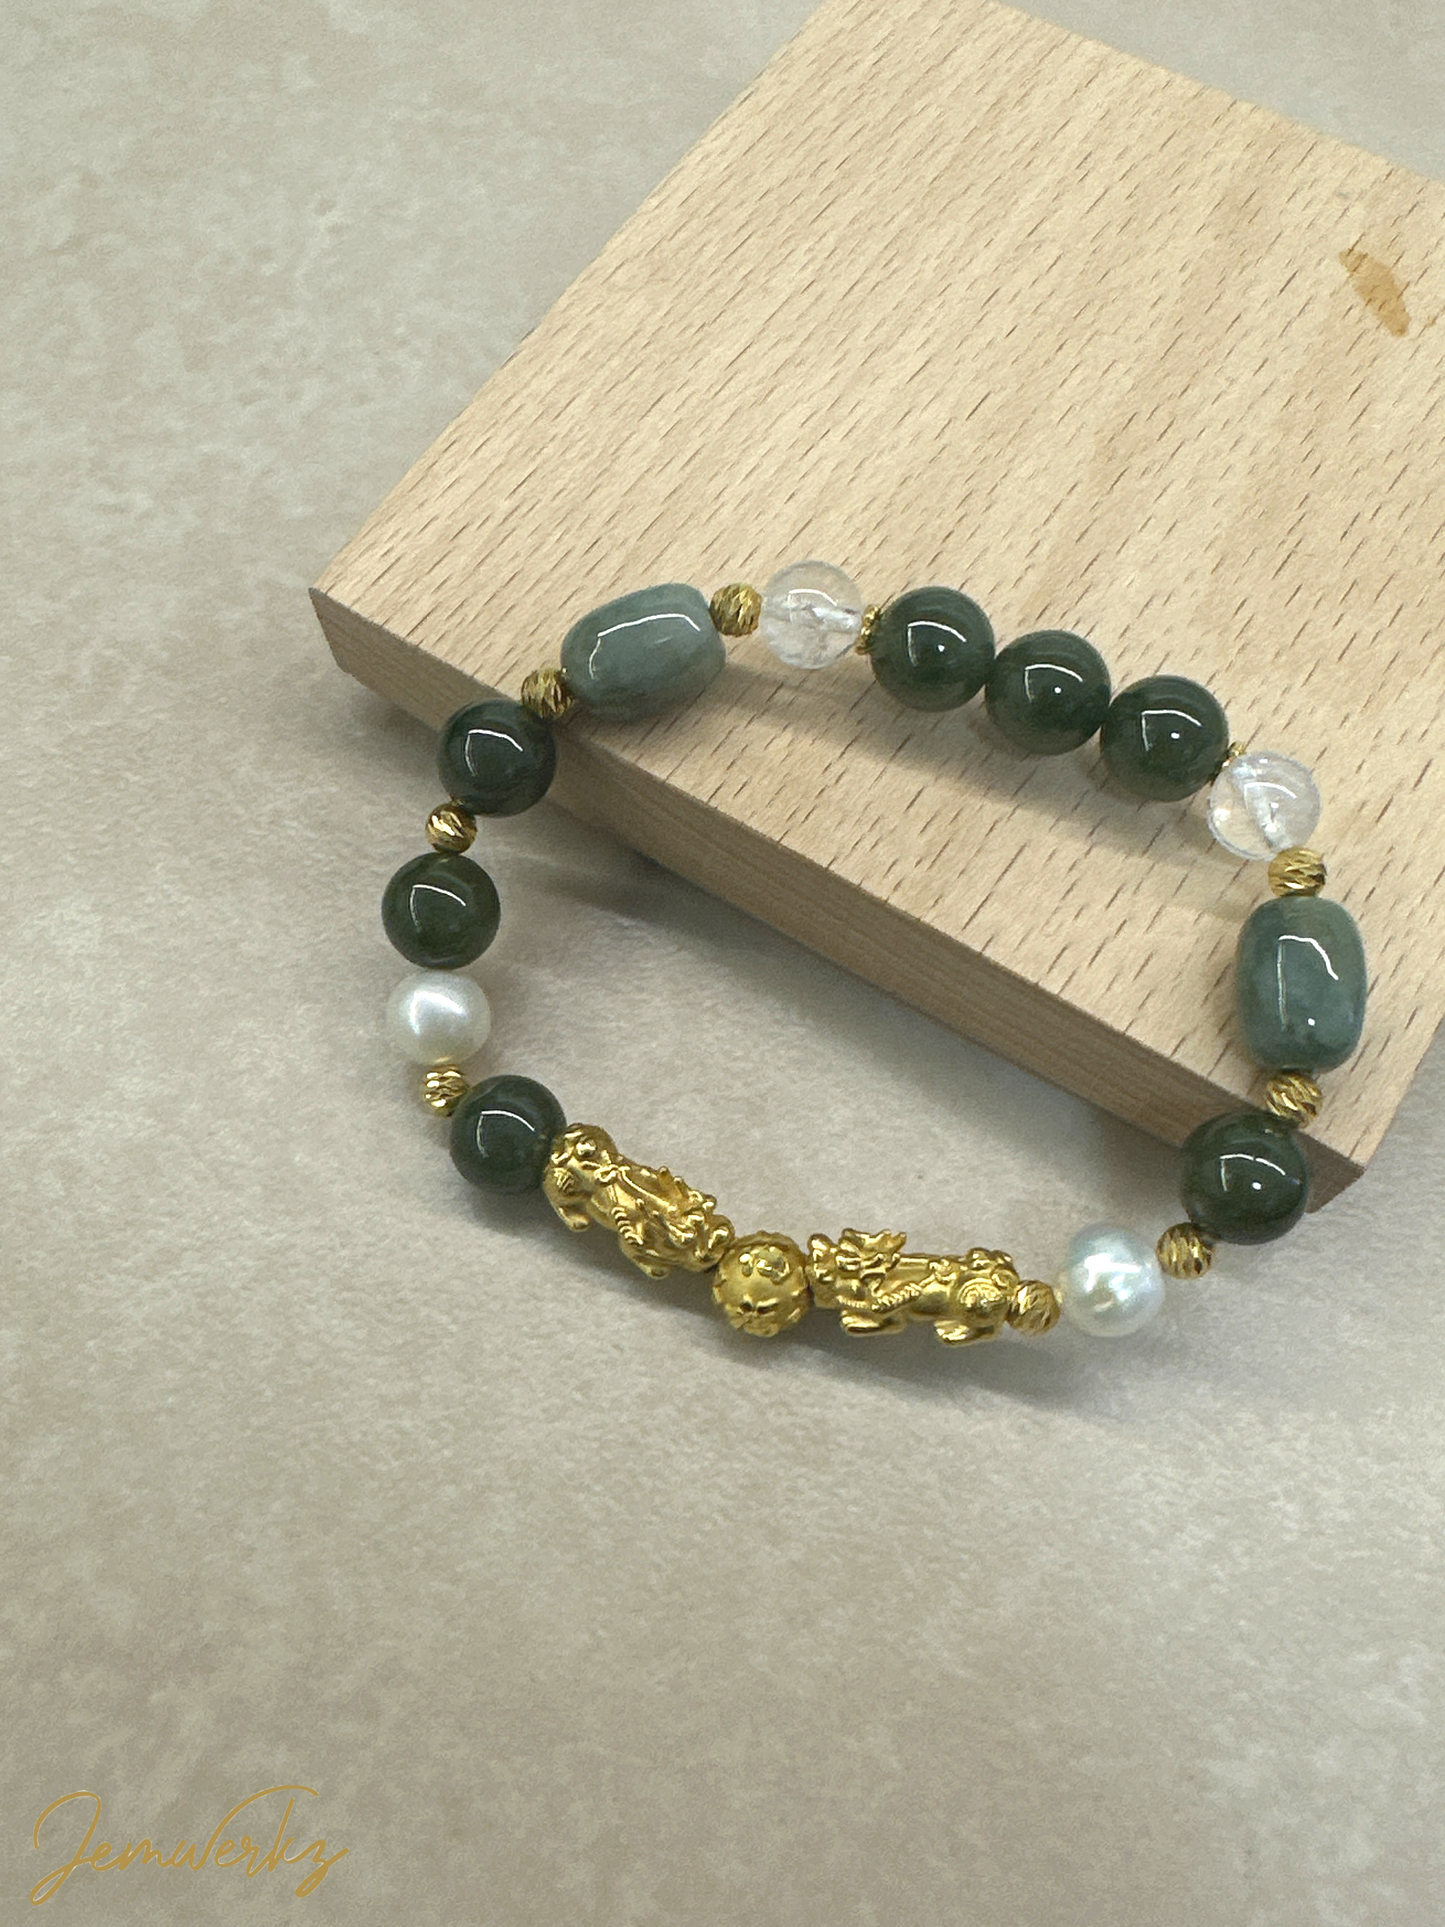 Load image into Gallery viewer, JORDANA GOLD 1.1 - 999 Pure Gold Pixiu with Jade Barrels, Jade, Crackled Clear Quartz, Freshwater Pearls and 916 Gold Spacers Bracelet
